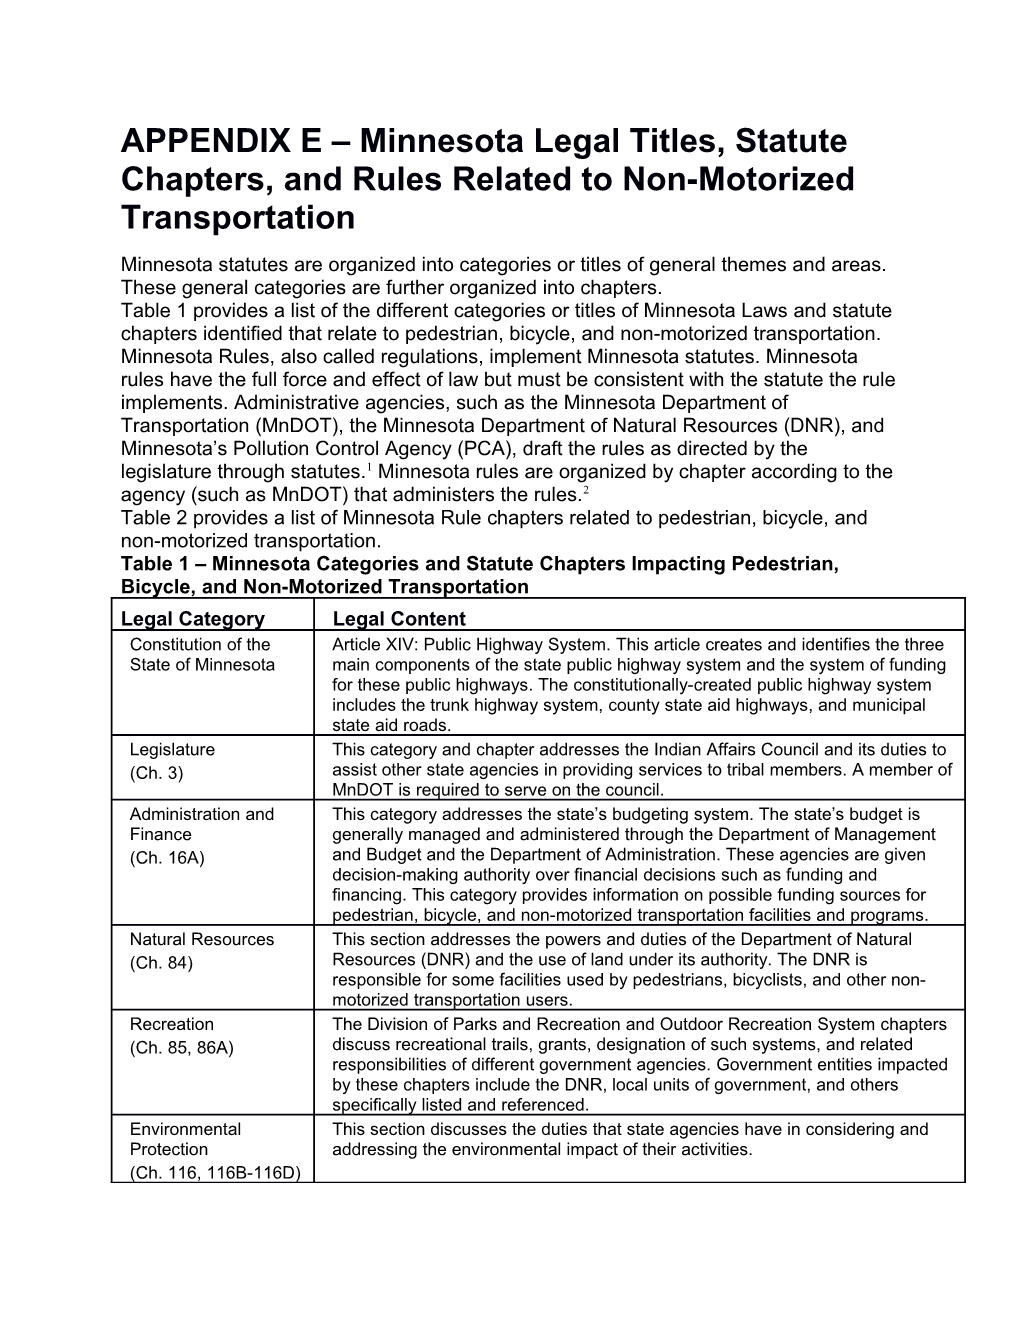 APPENDIX E Minnesota Legal Titles, Statute Chapters, and Rules Related to Non-Motorized